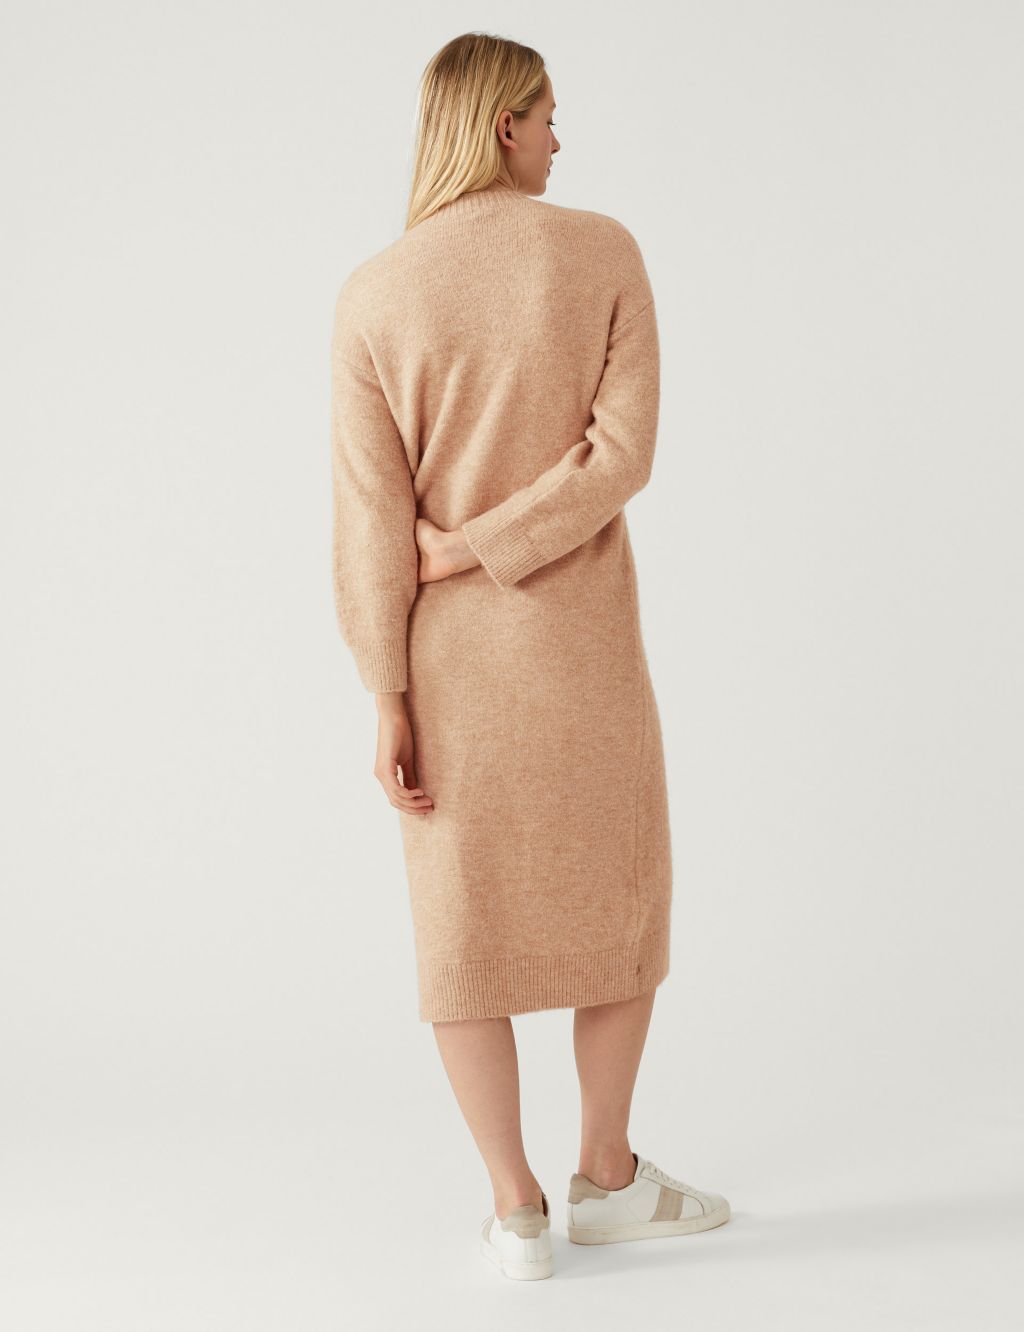 Knitted Crew Neck Dress image 5